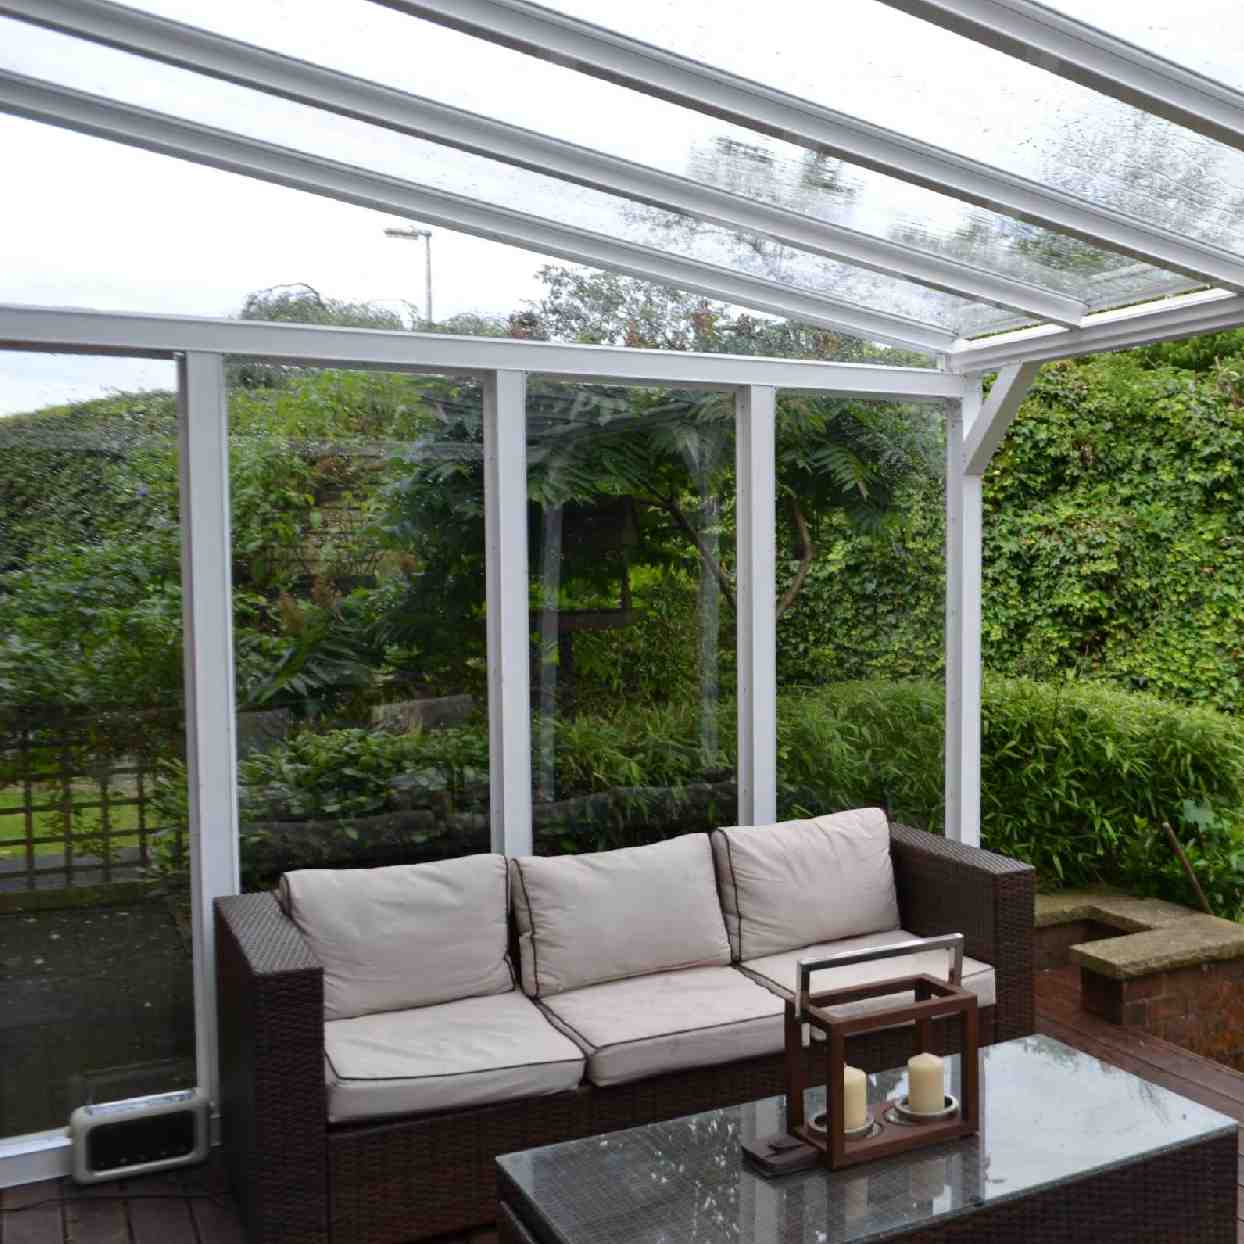 Buy Omega Verandah White with 16mm Polycarbonate Glazing - 11.6m (W) x 2.5m (P), (5) Supporting Posts online today